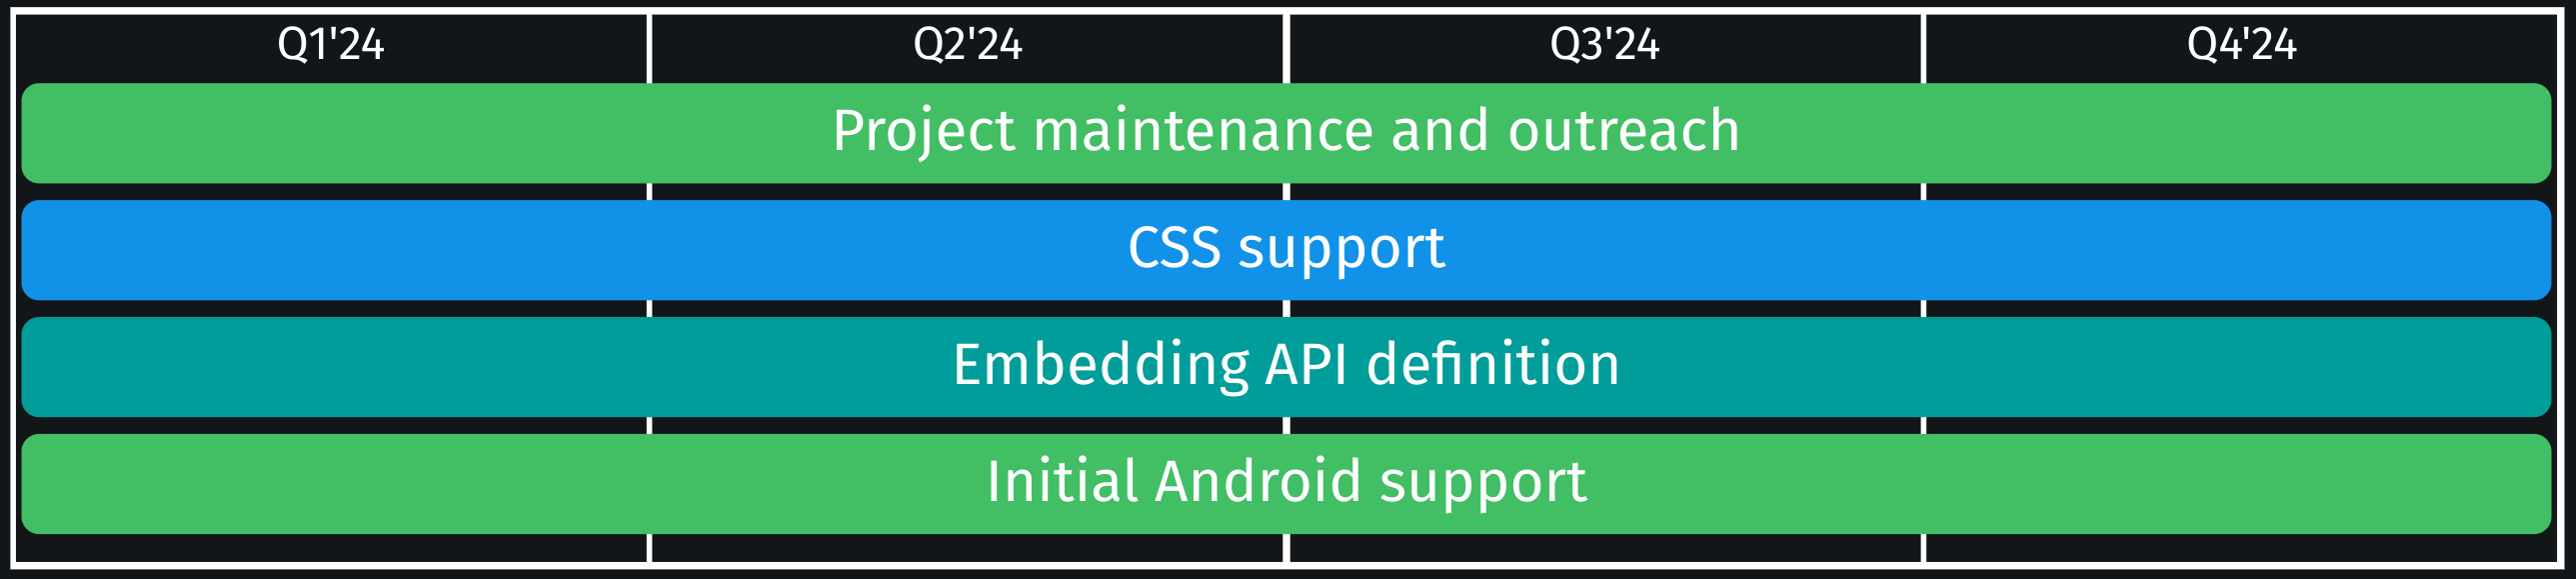 Servo roadmap for 2024 with the following tasks expanding the whole year: project maintenance and outreach, CSS support, embedding API definition and initial Android support